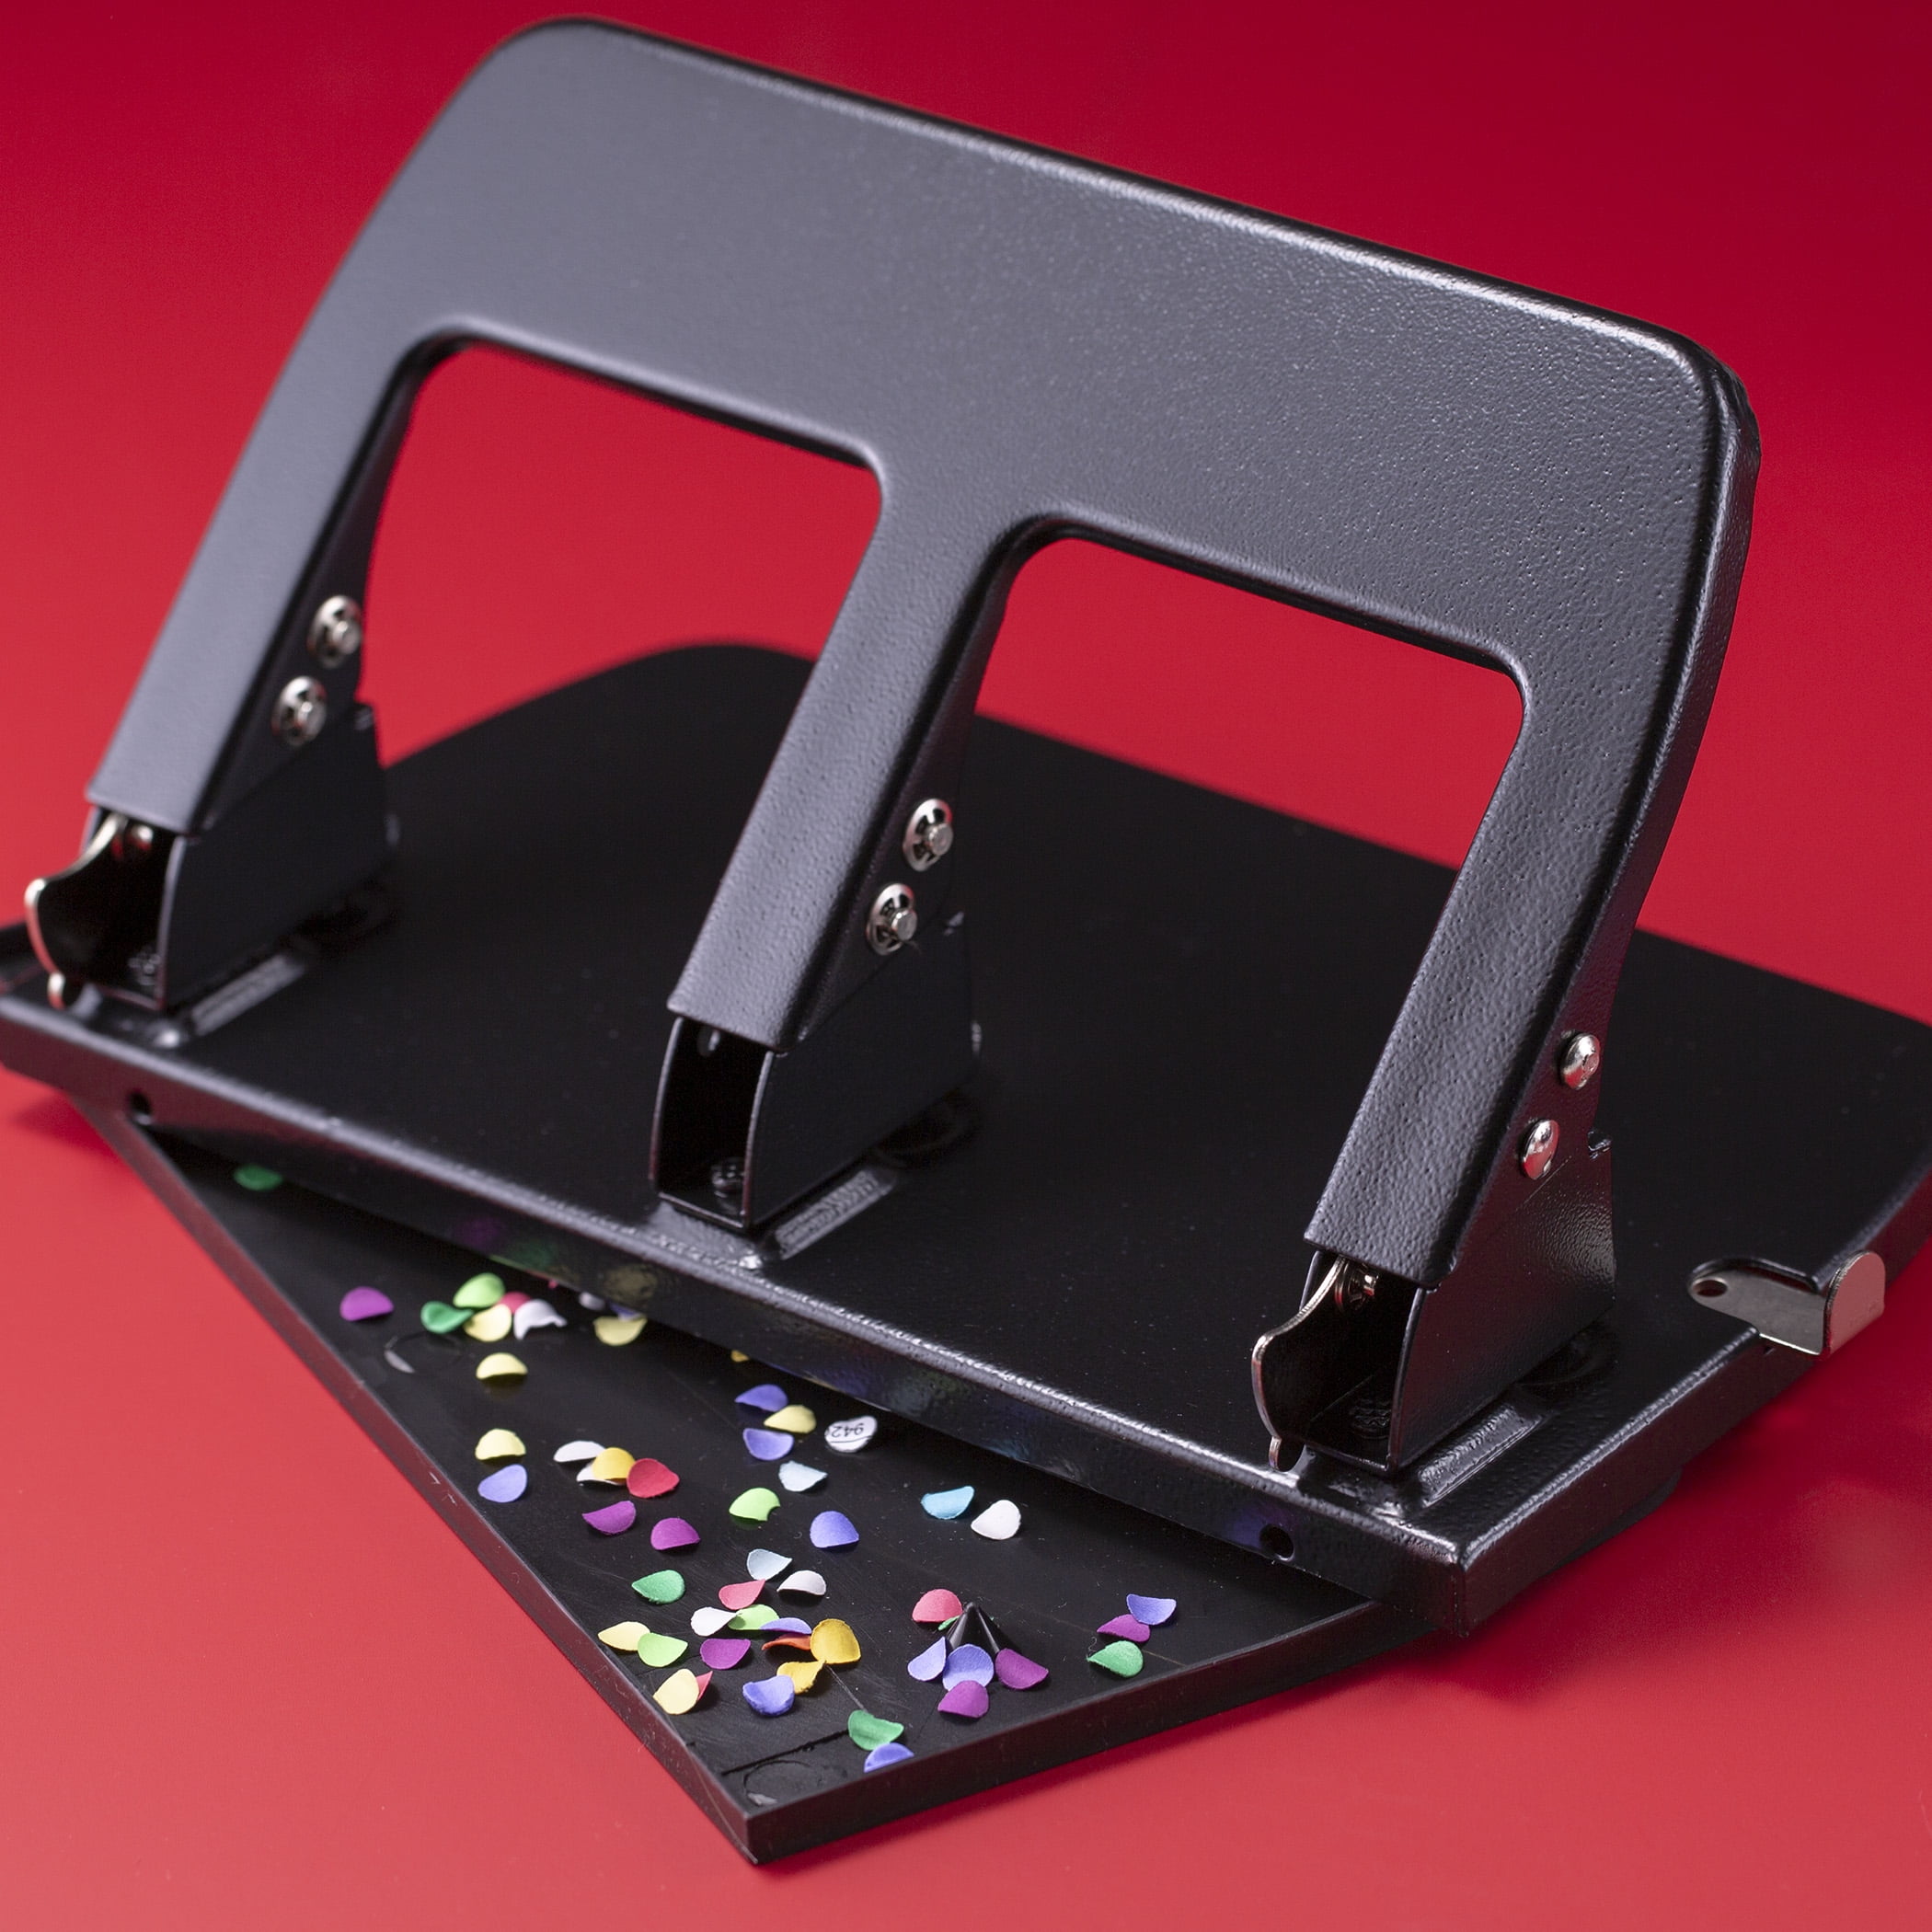 Officemate Heavy-duty 3-hole Punch with Padded Handle - The Office Point